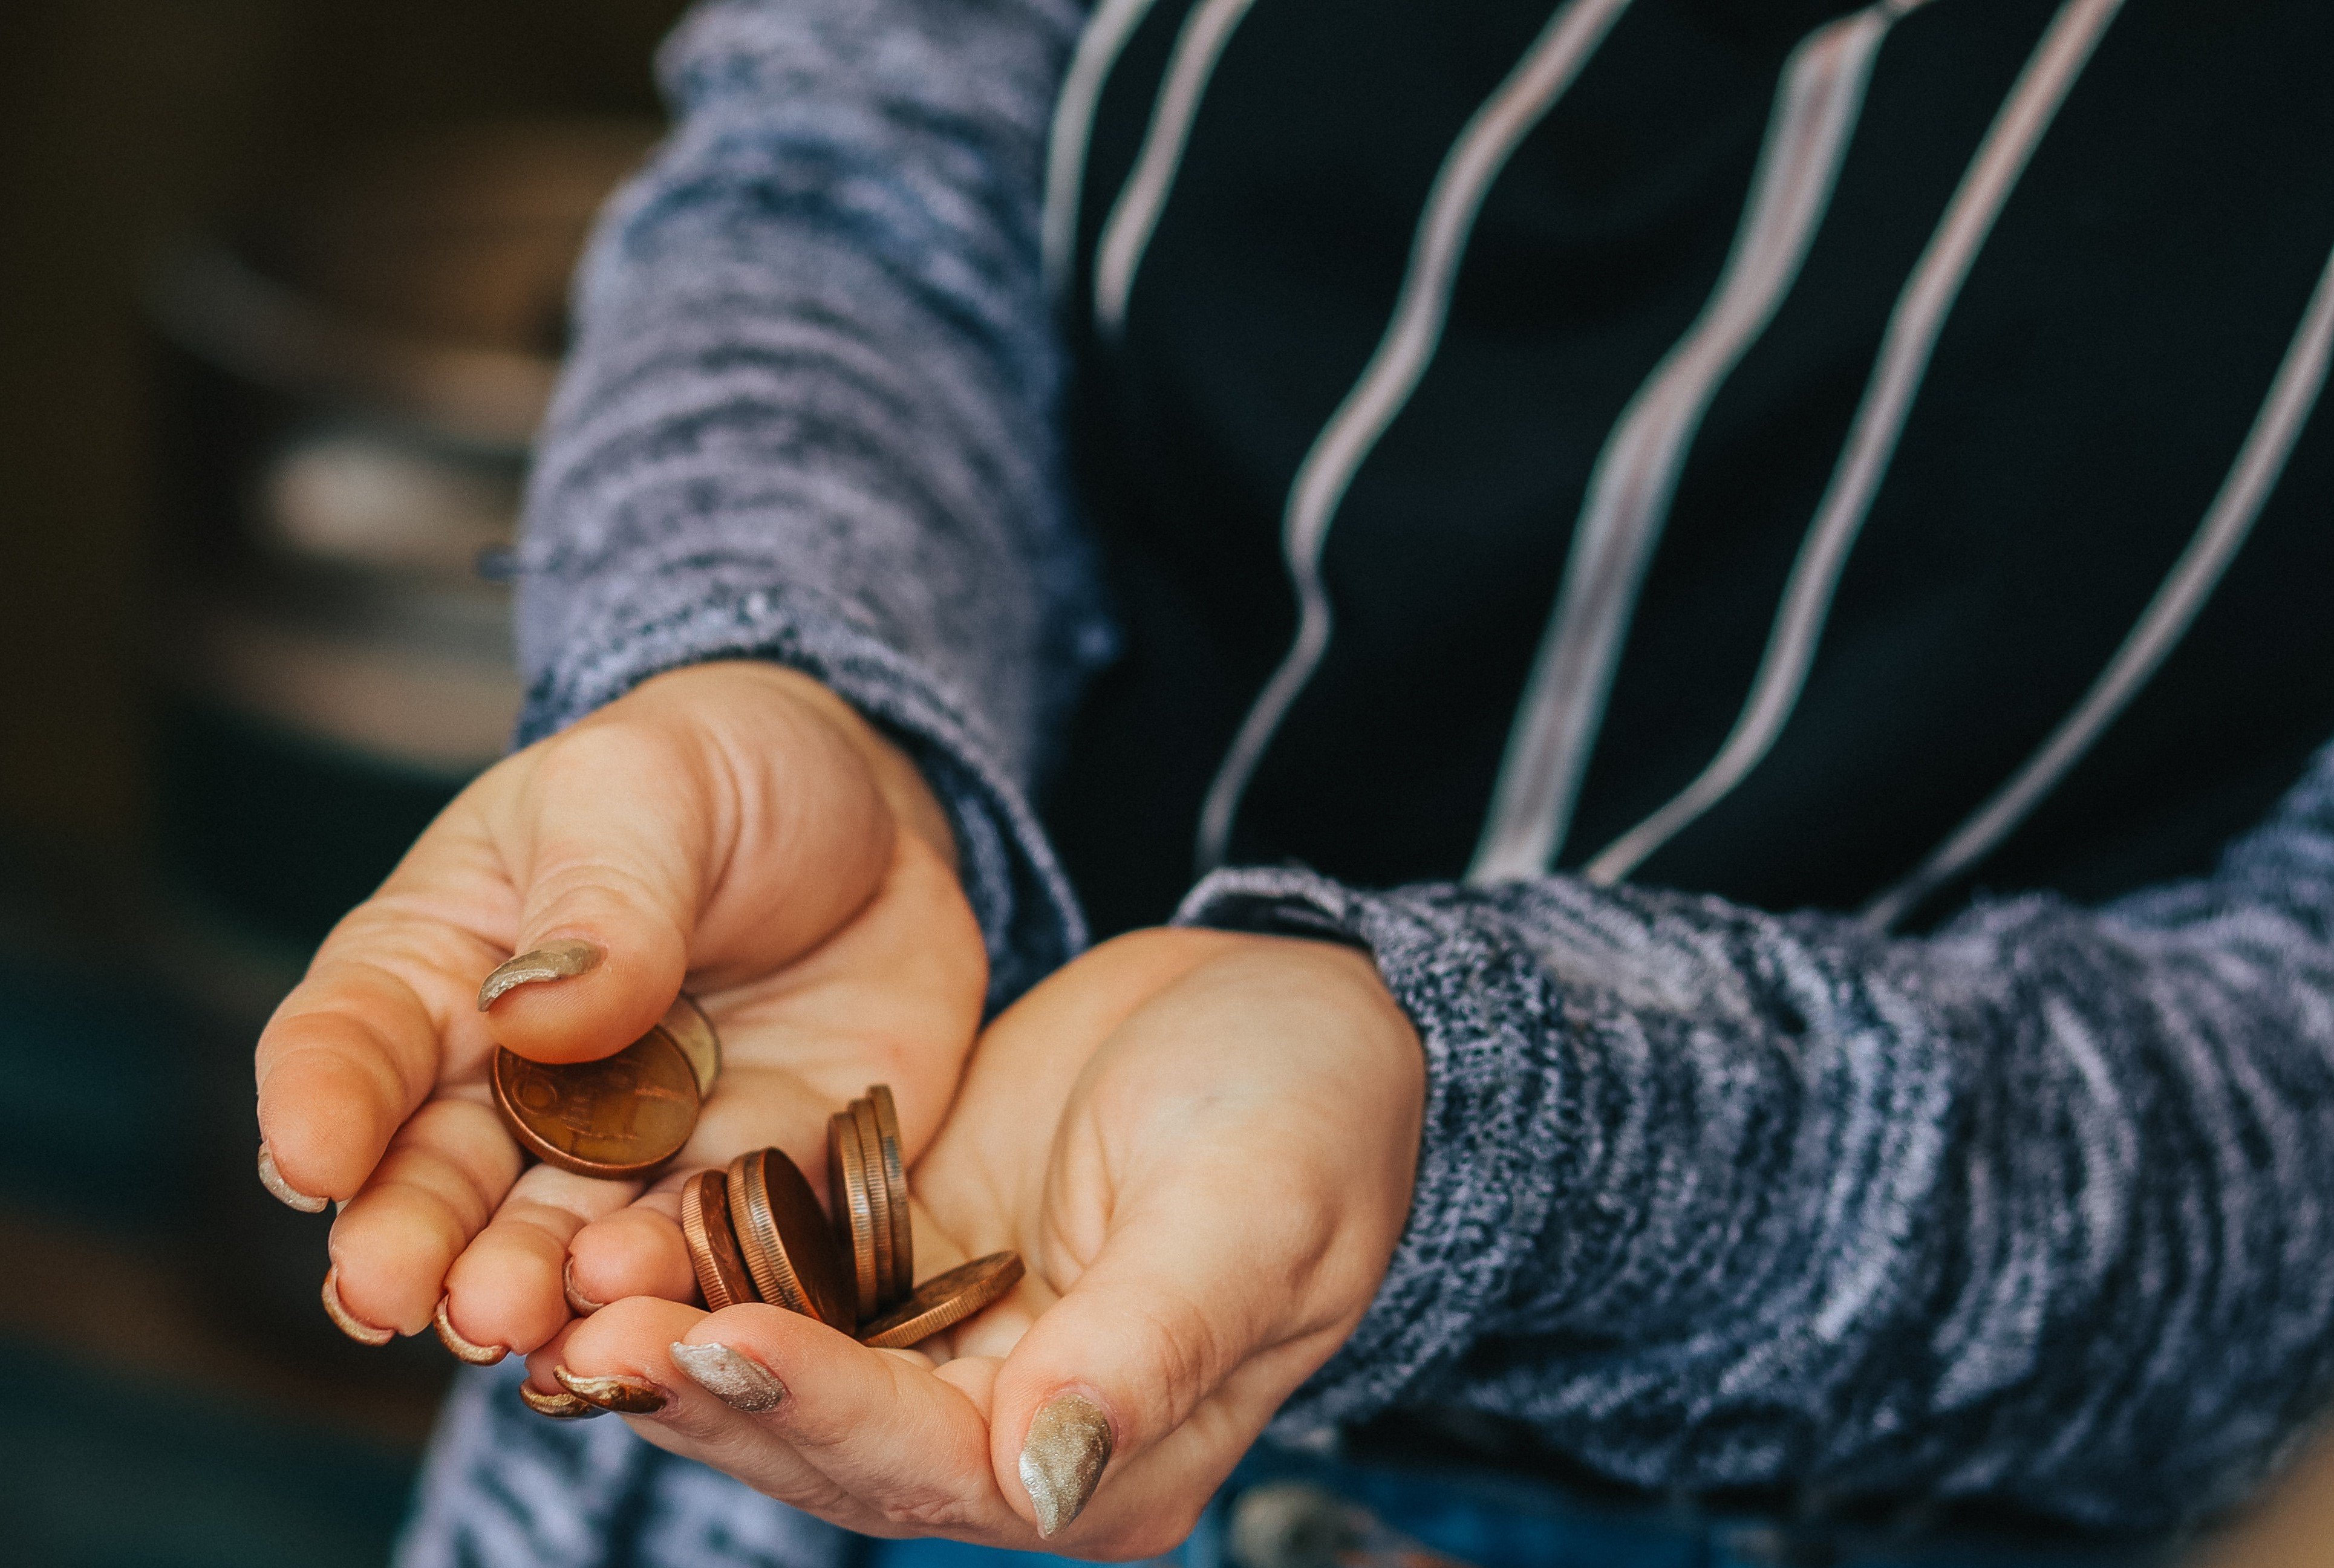 A woman holding coins in her hands | Source: Pexels